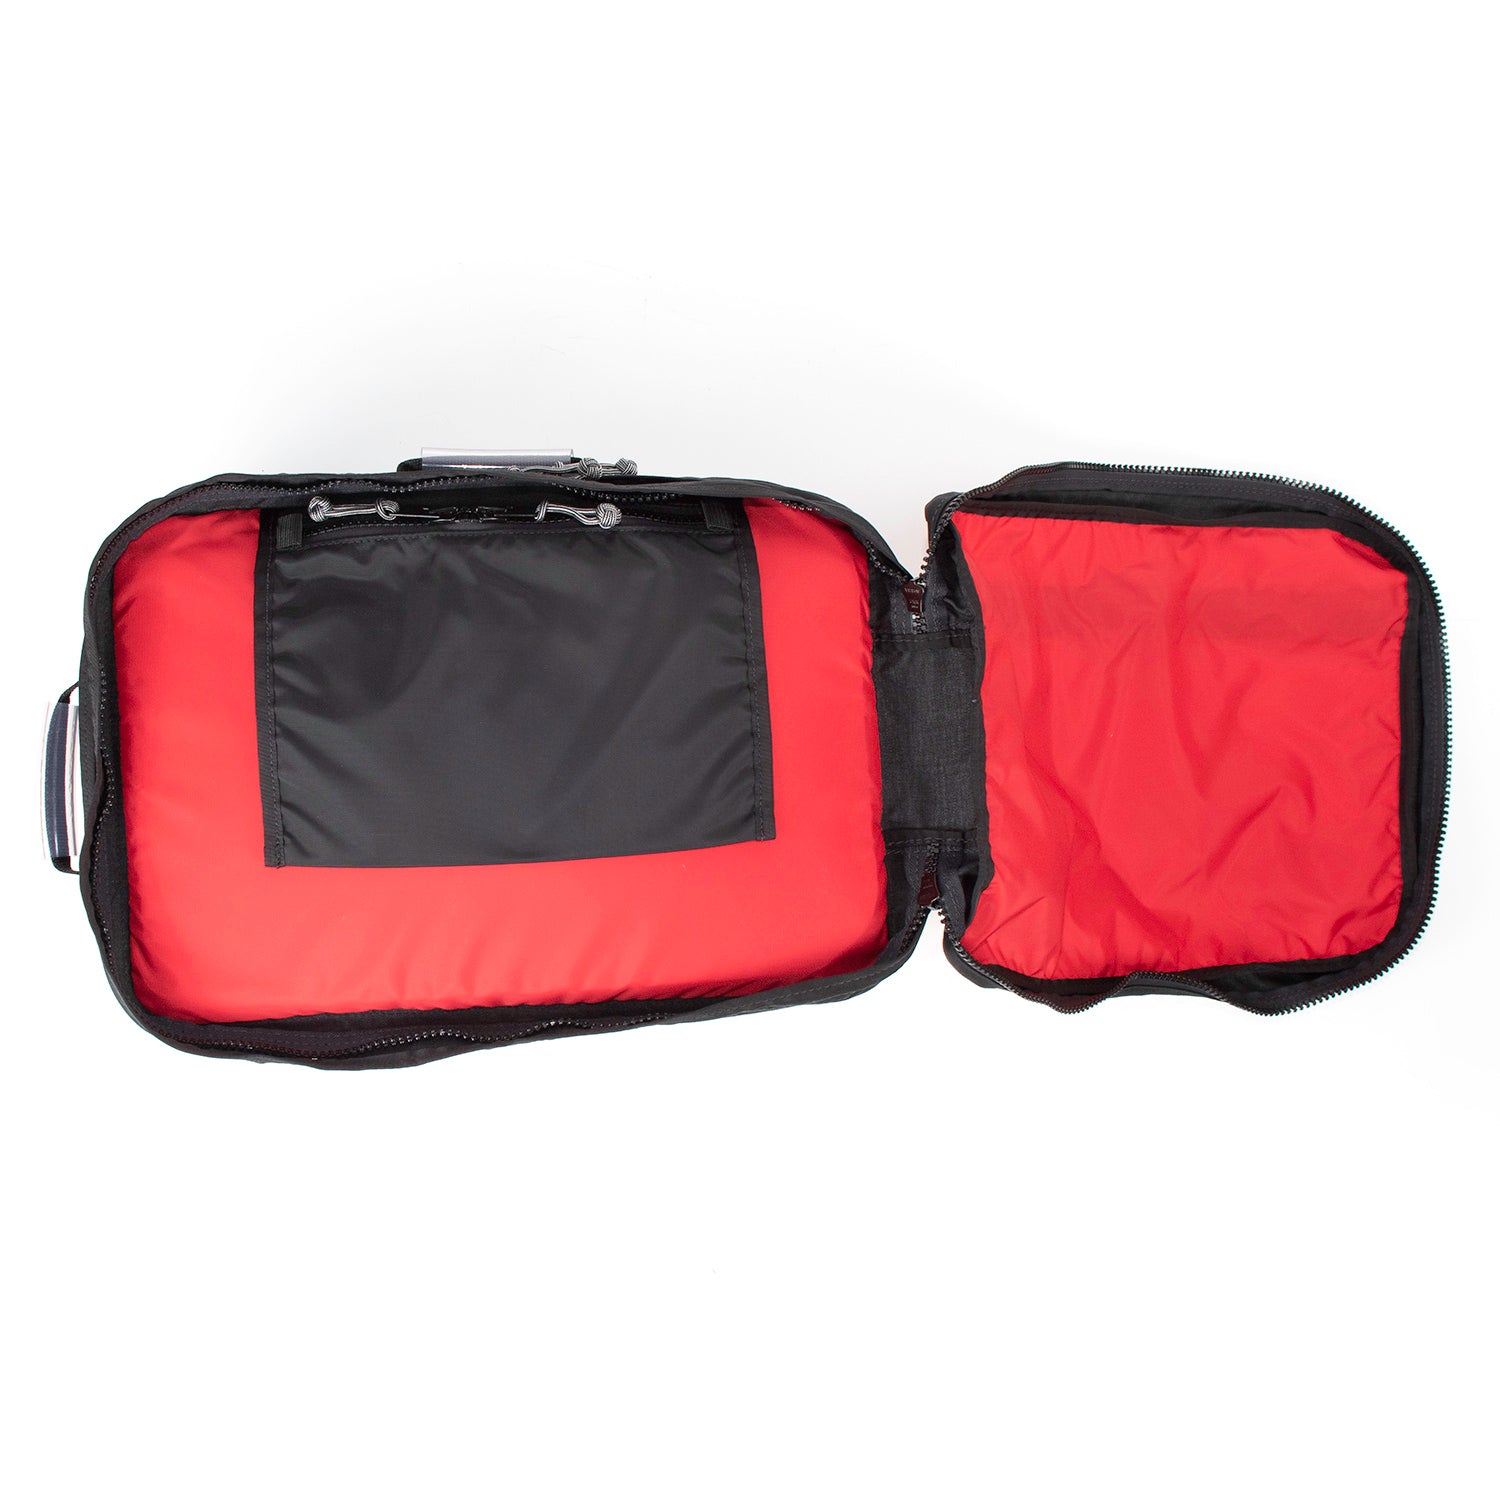 Outer compartment with integrated toiletry pouch.